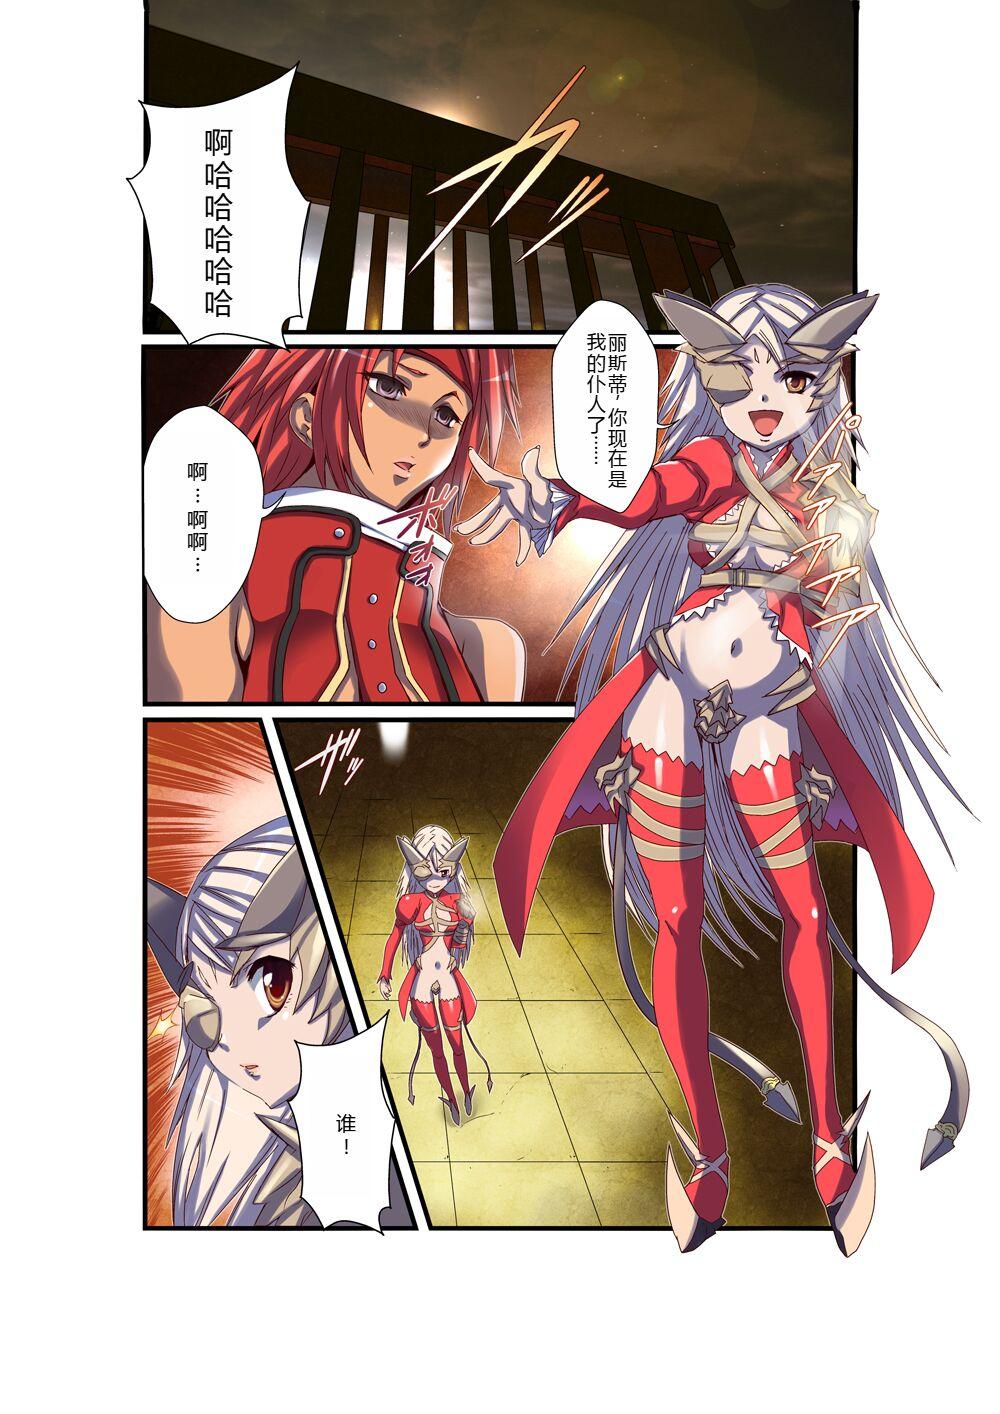 Mamada Queen's *lade Mind-control Manga - Queens blade Curious - Picture 1